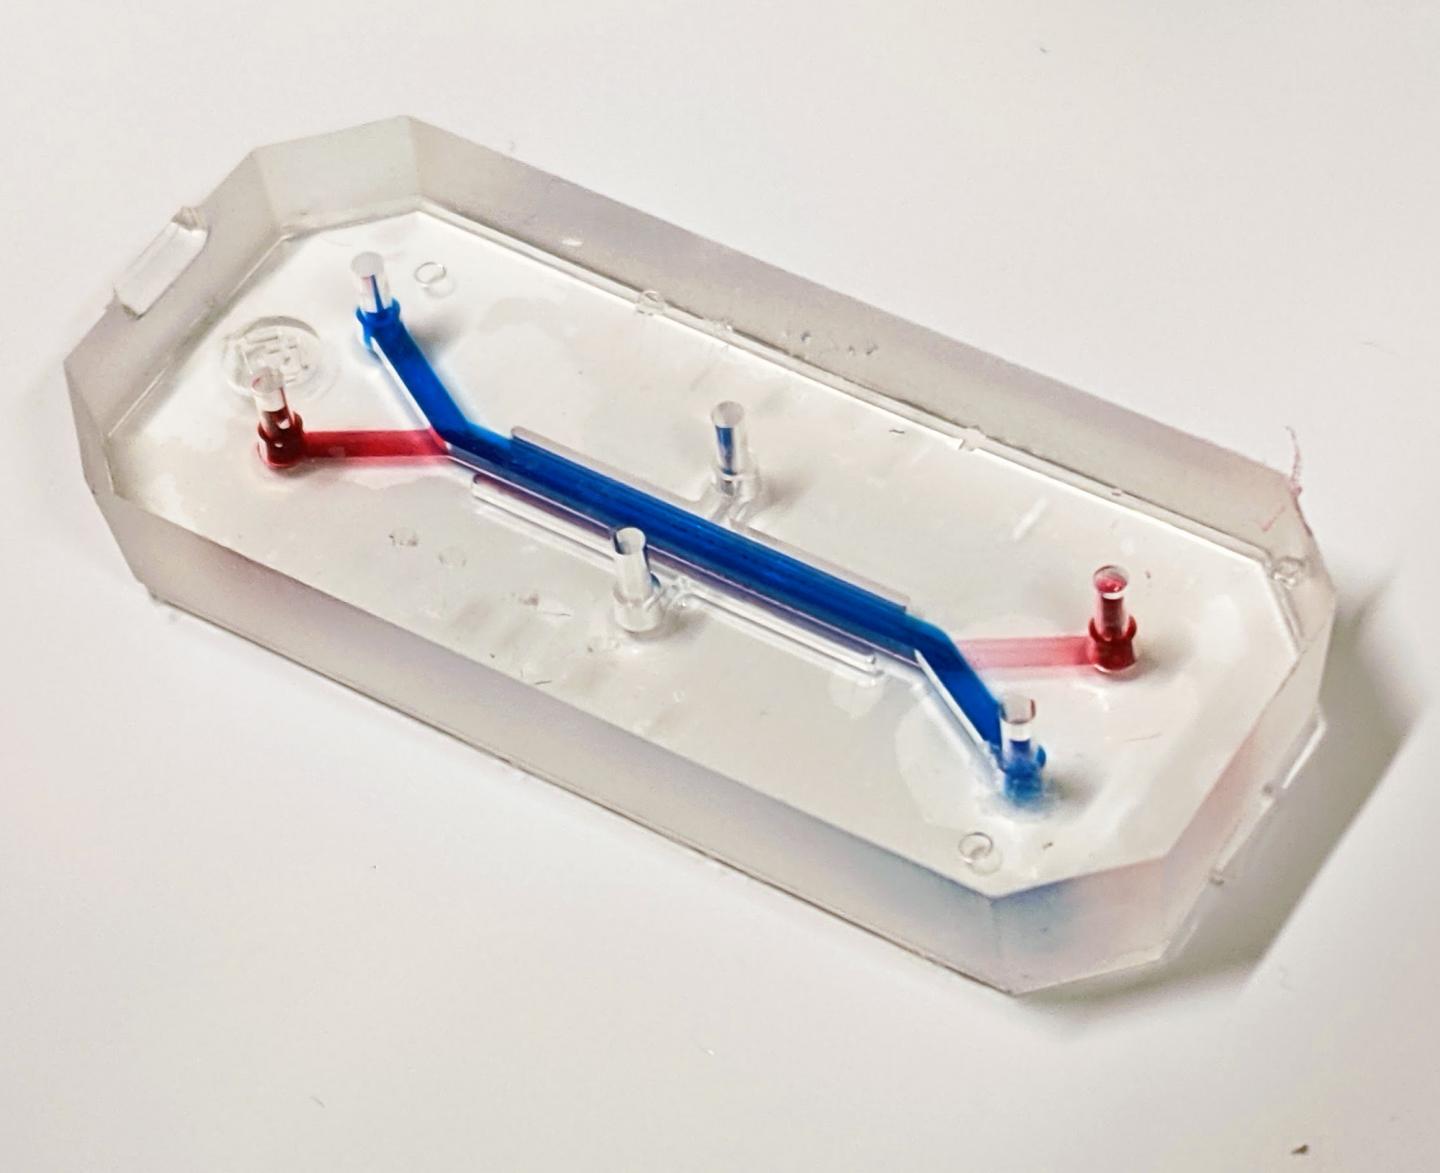 Lung-on-chip model